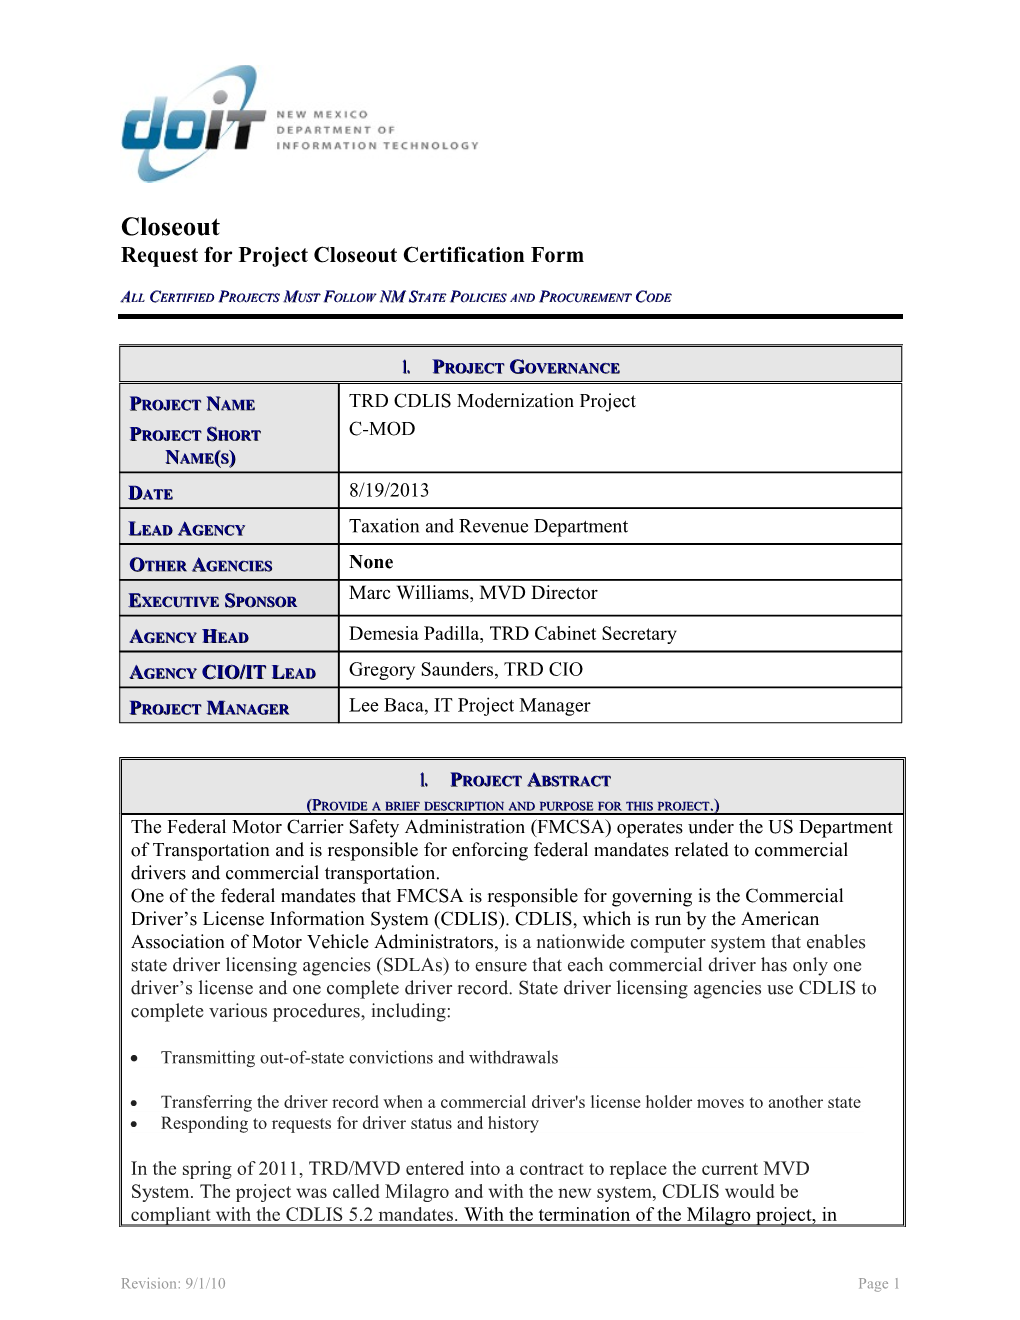 Request for Project Closeout Certification Form s2